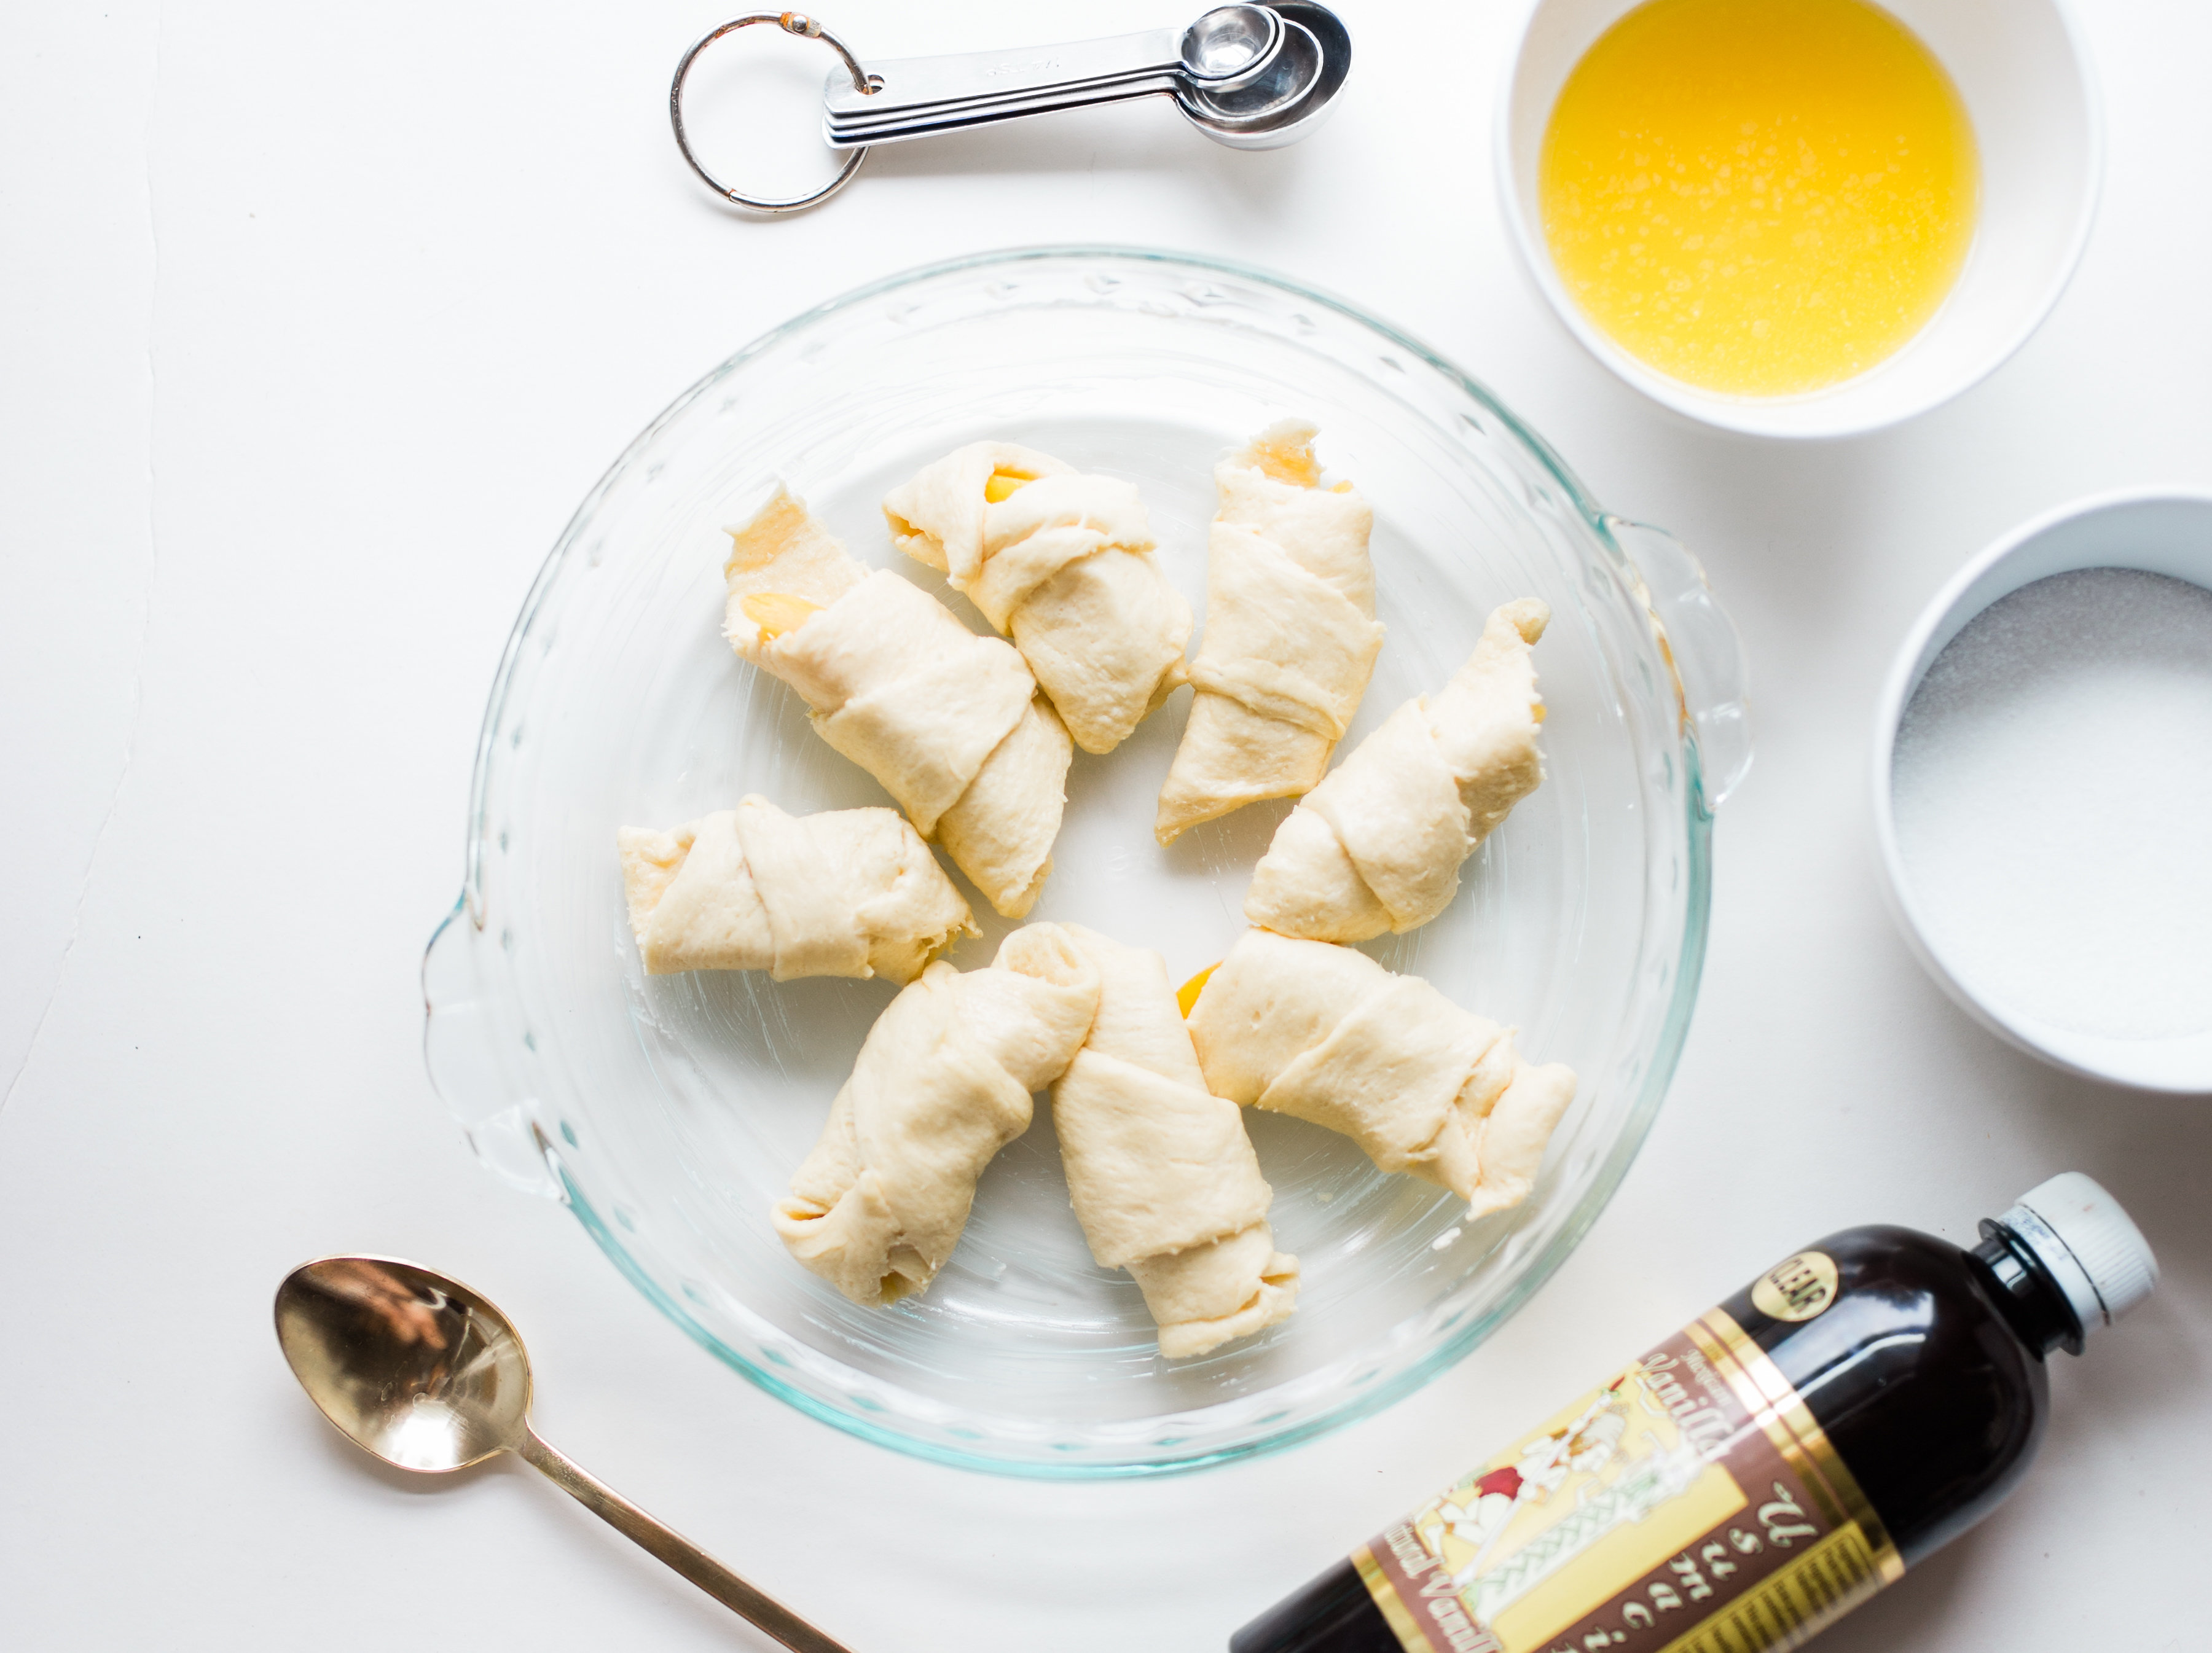 These easy 10-minute dumplings are sure to become one of your new favorite desserts. (And we'll show you how to make them vegan too!) Click through for the recipe. | glitterinc.com | @glitterinc